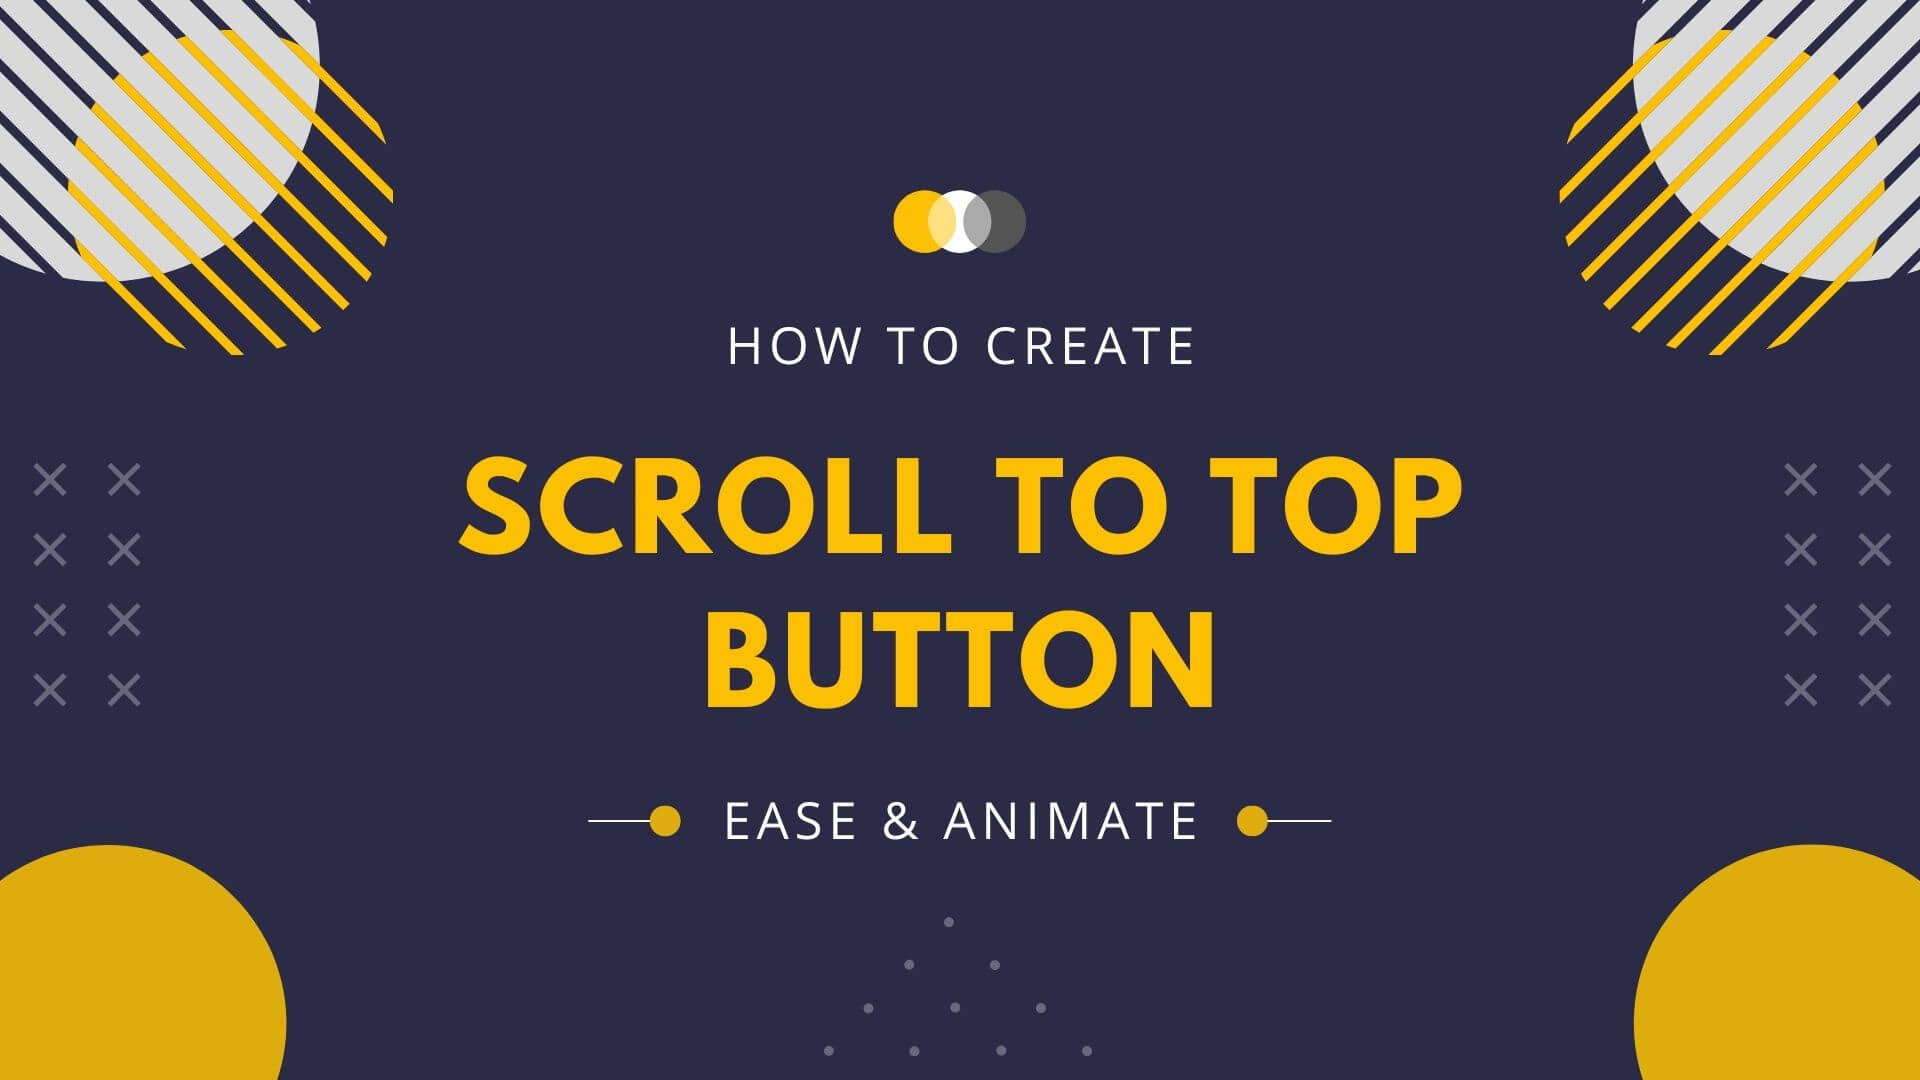 How to create a scroll to-top button with ease and animate